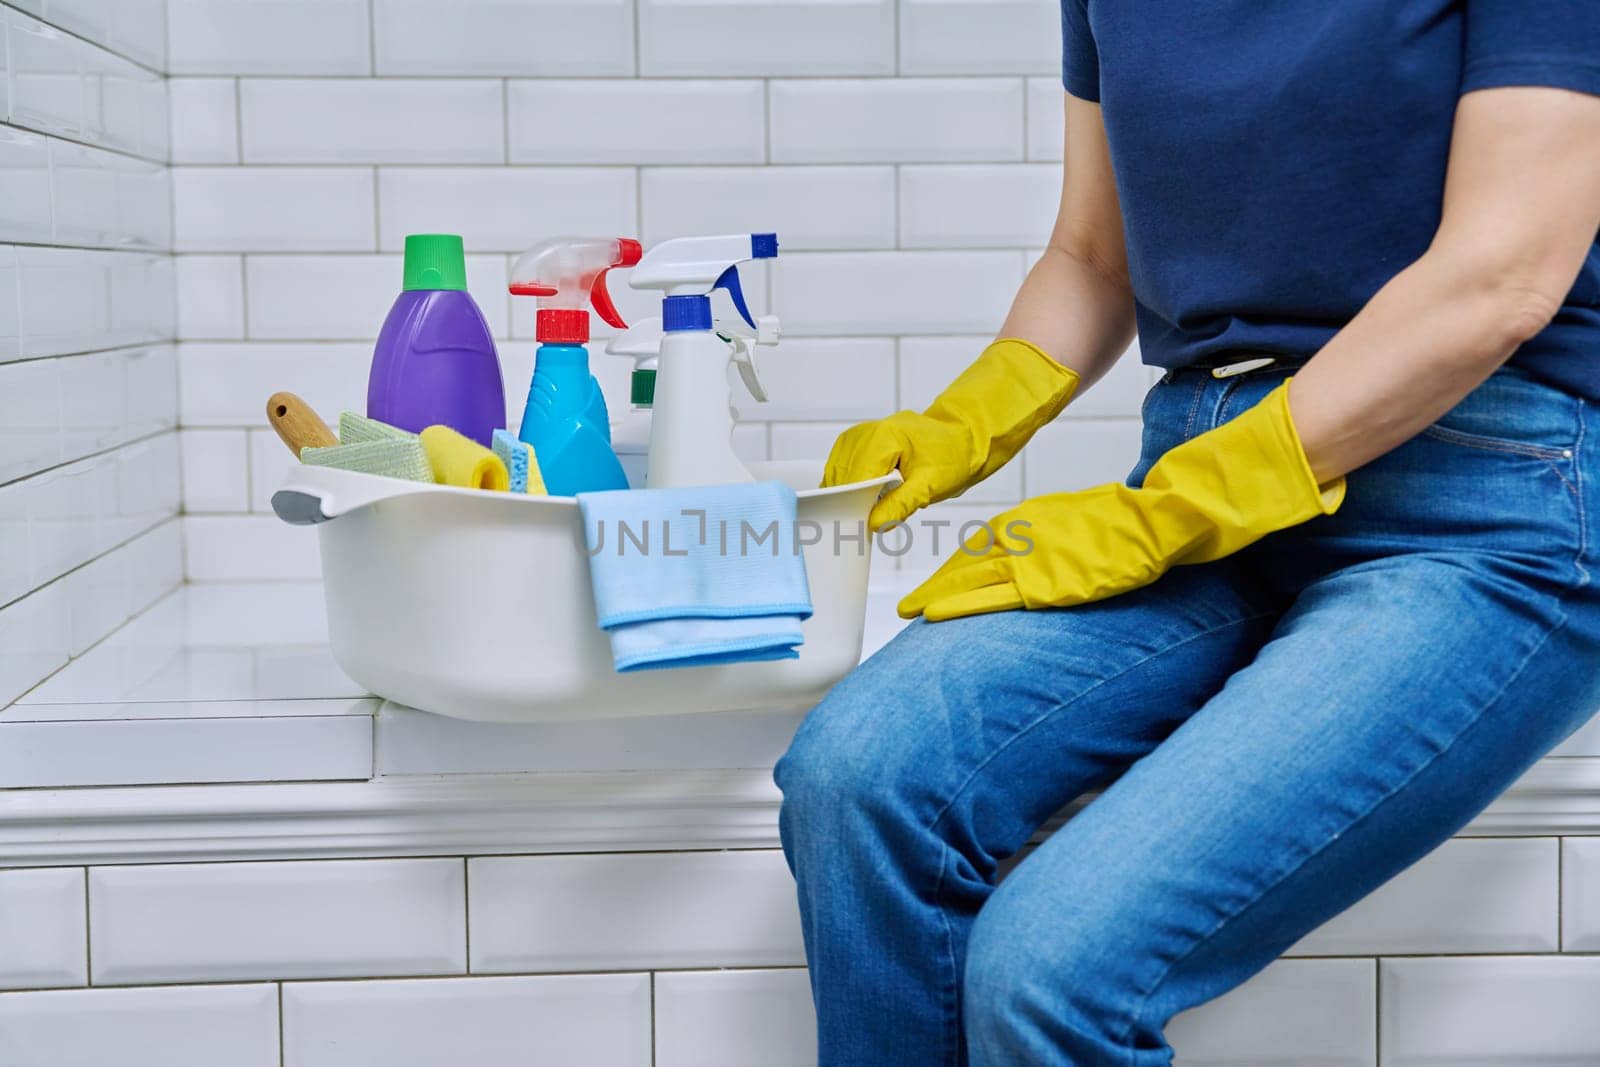 House cleaning housework concept, housekeeping housecleaning service, close-up of basin with cleaning products and washcloths, brushes, rags and woman hands in rubber protective gloves, in bathroom